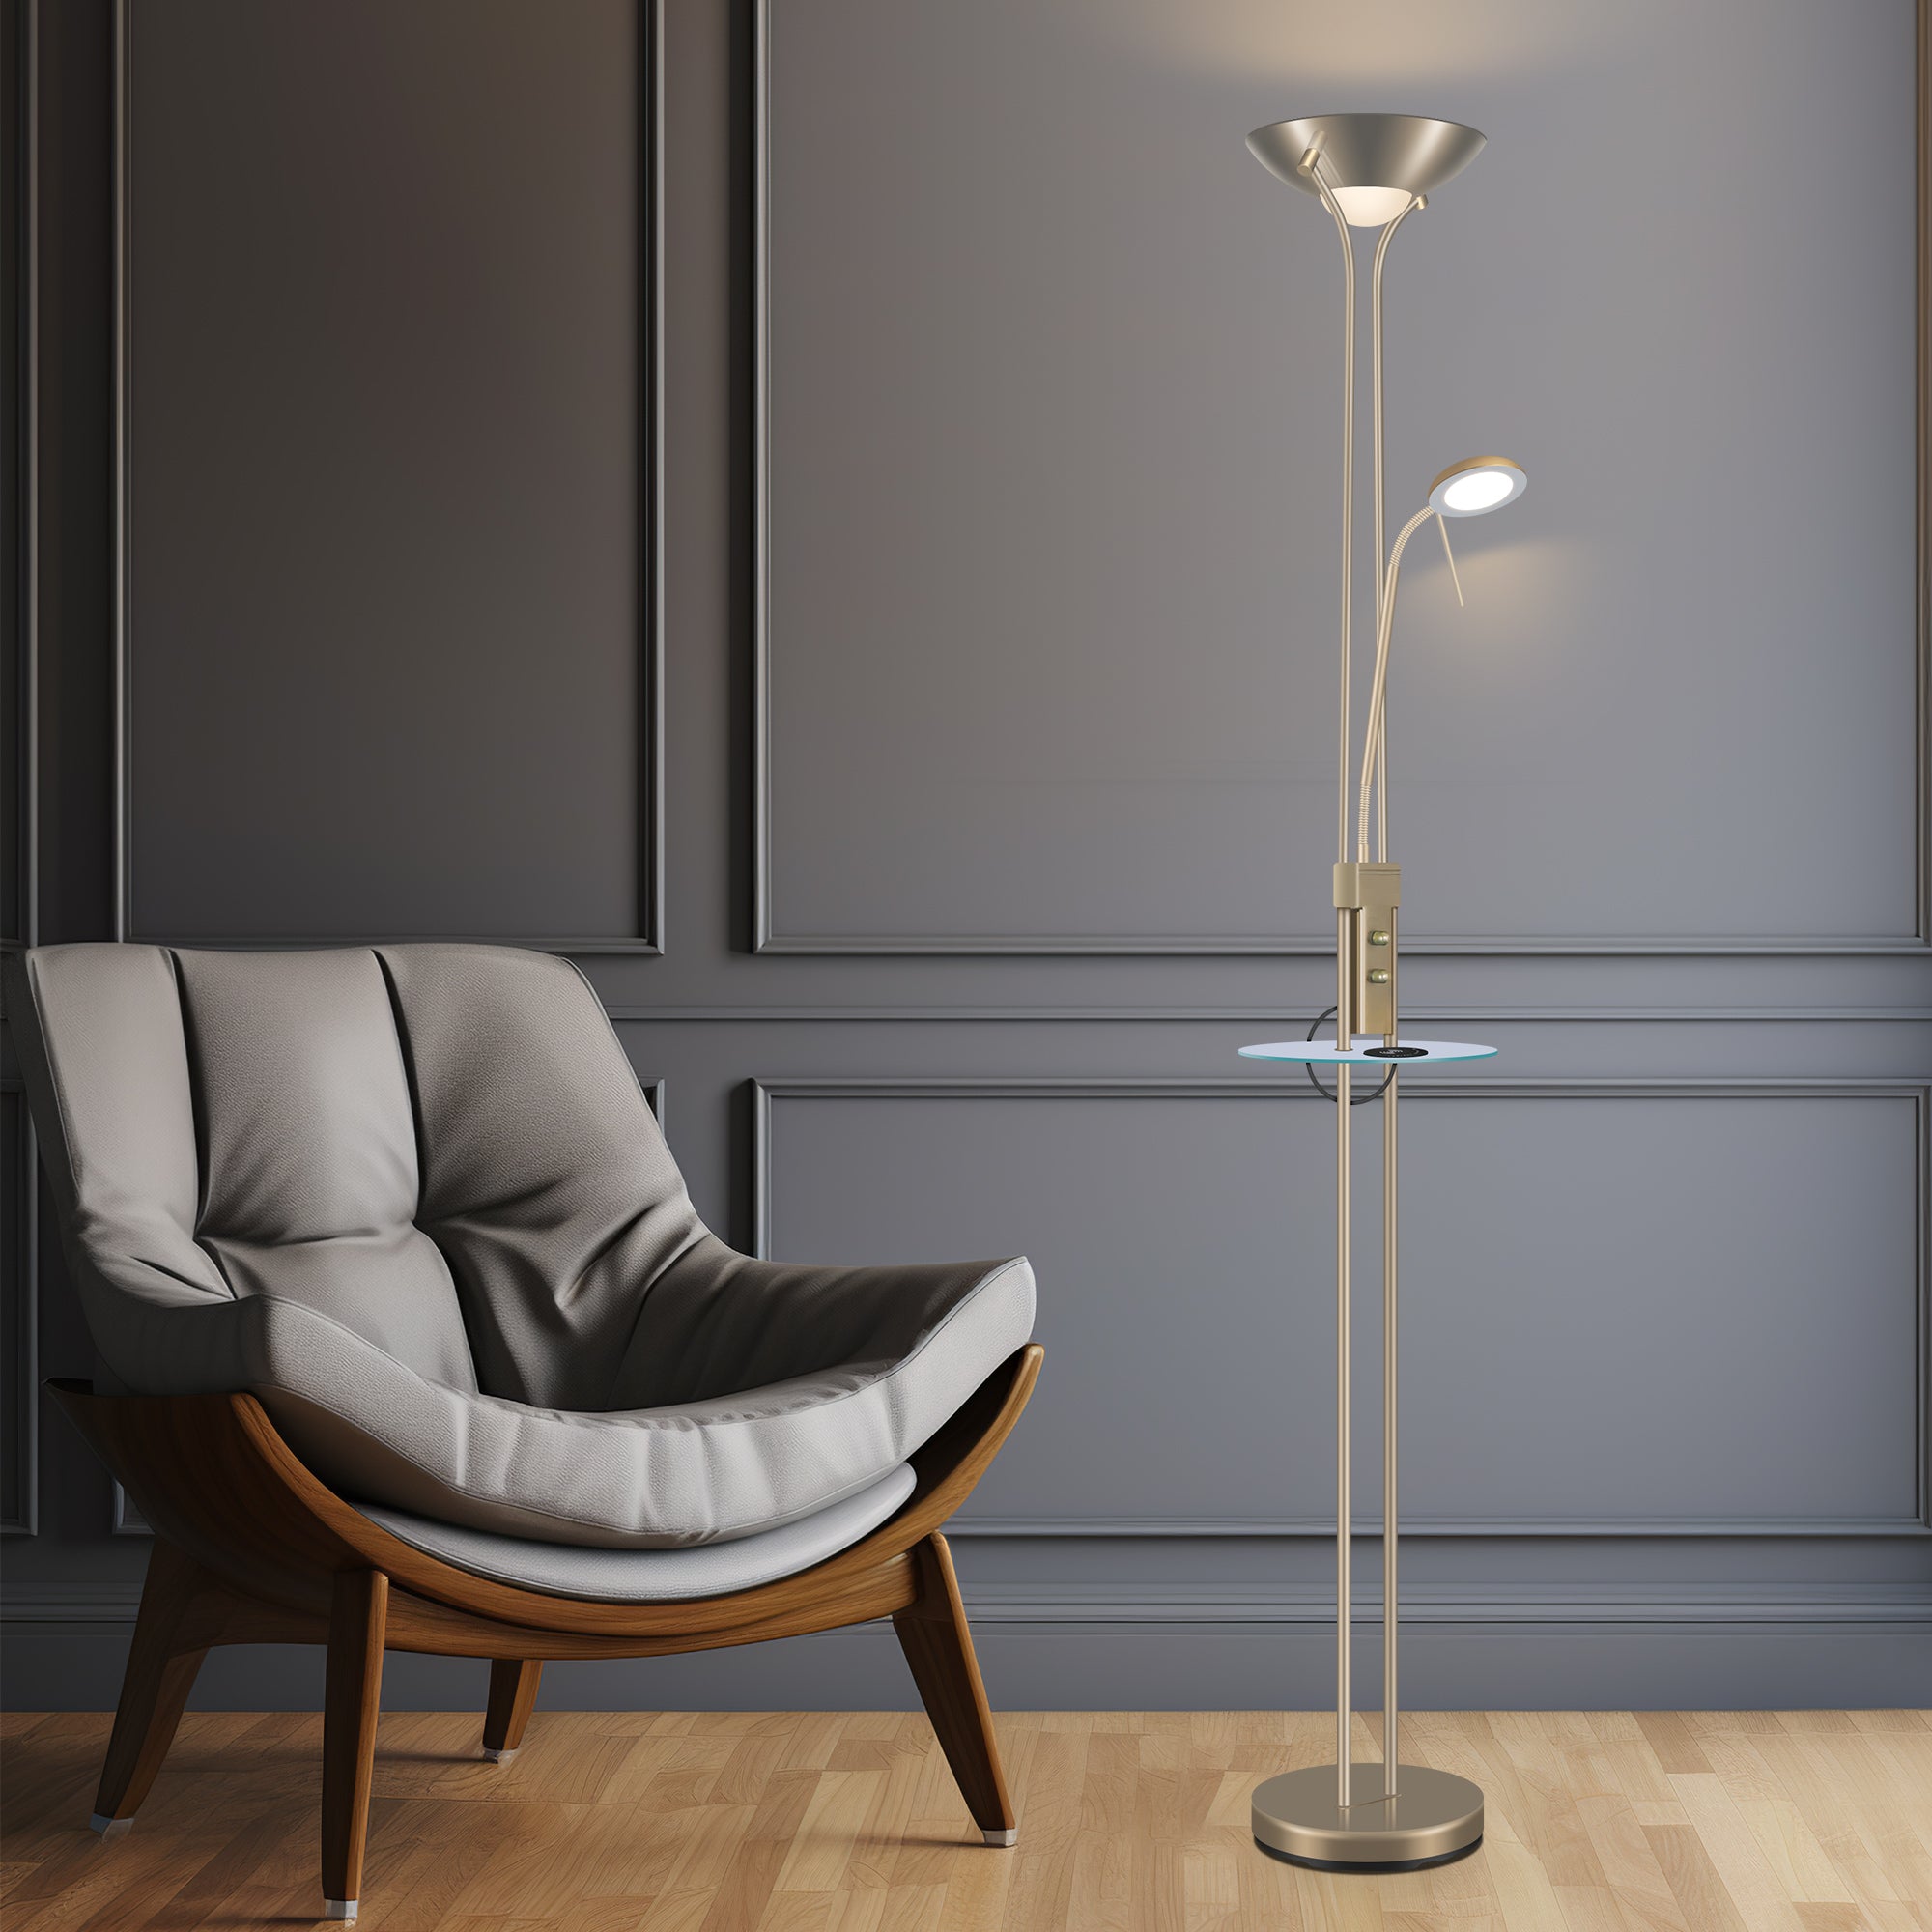 Seed USB LED Mother & Child Floor Lamp - Antique Brass